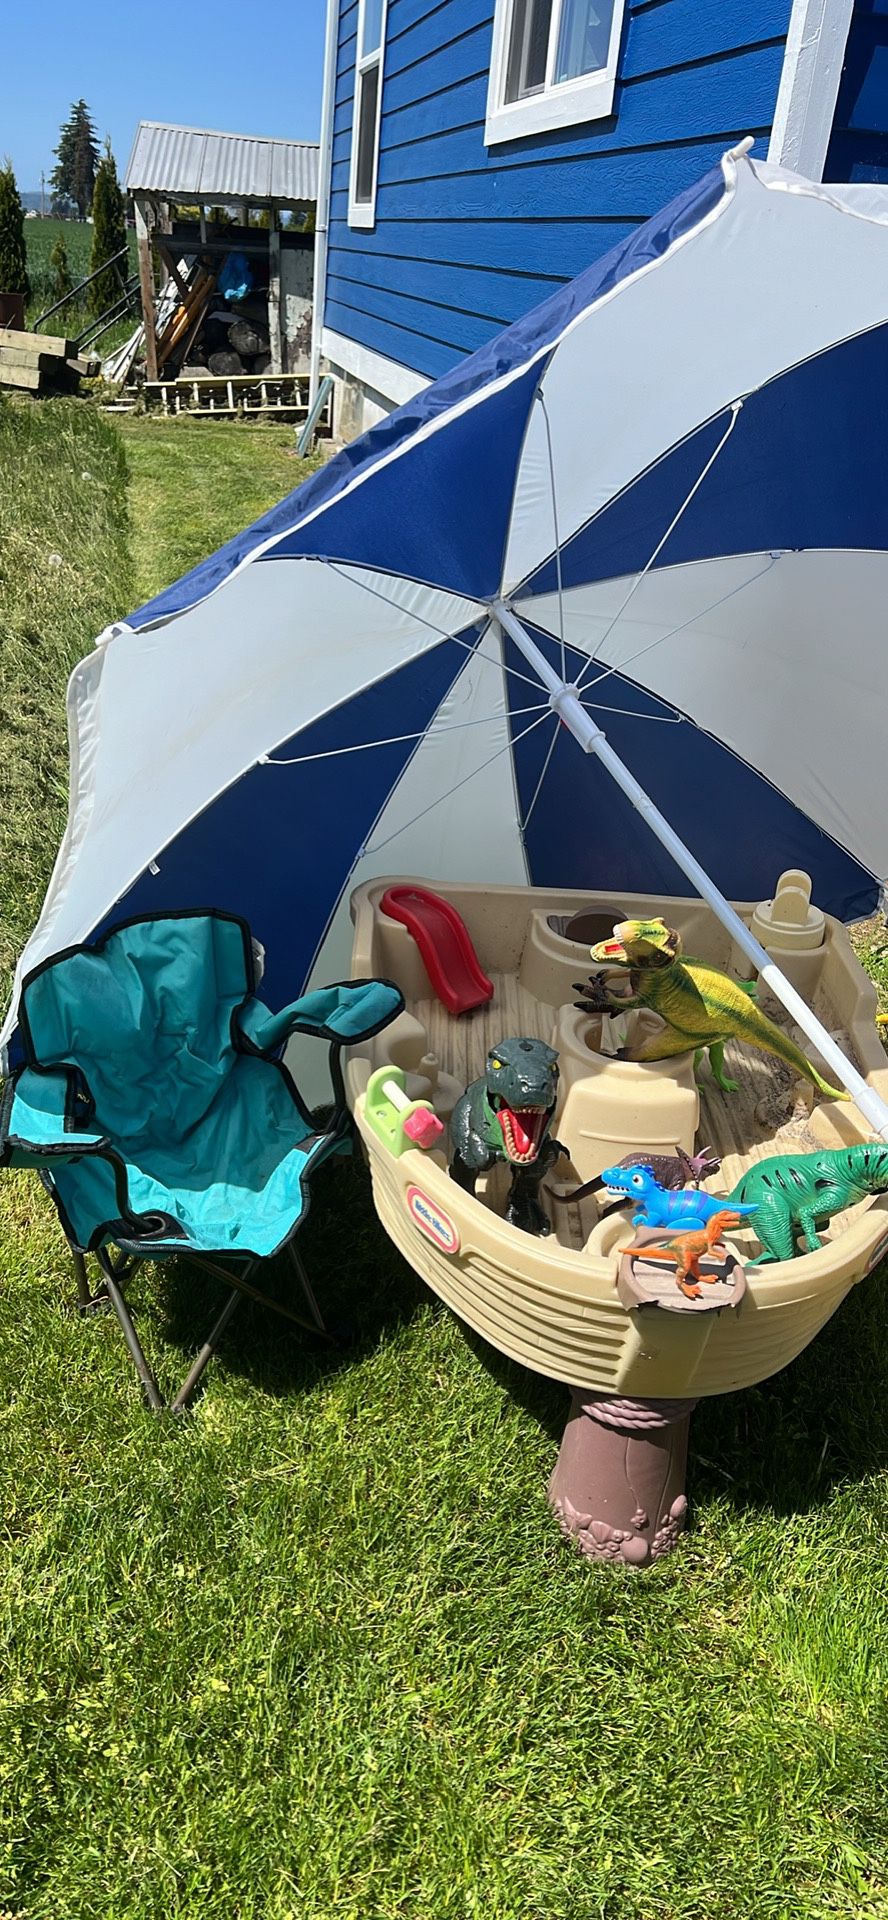 Water/sand Boat With Umbrella A Chair And Dinosaurs 